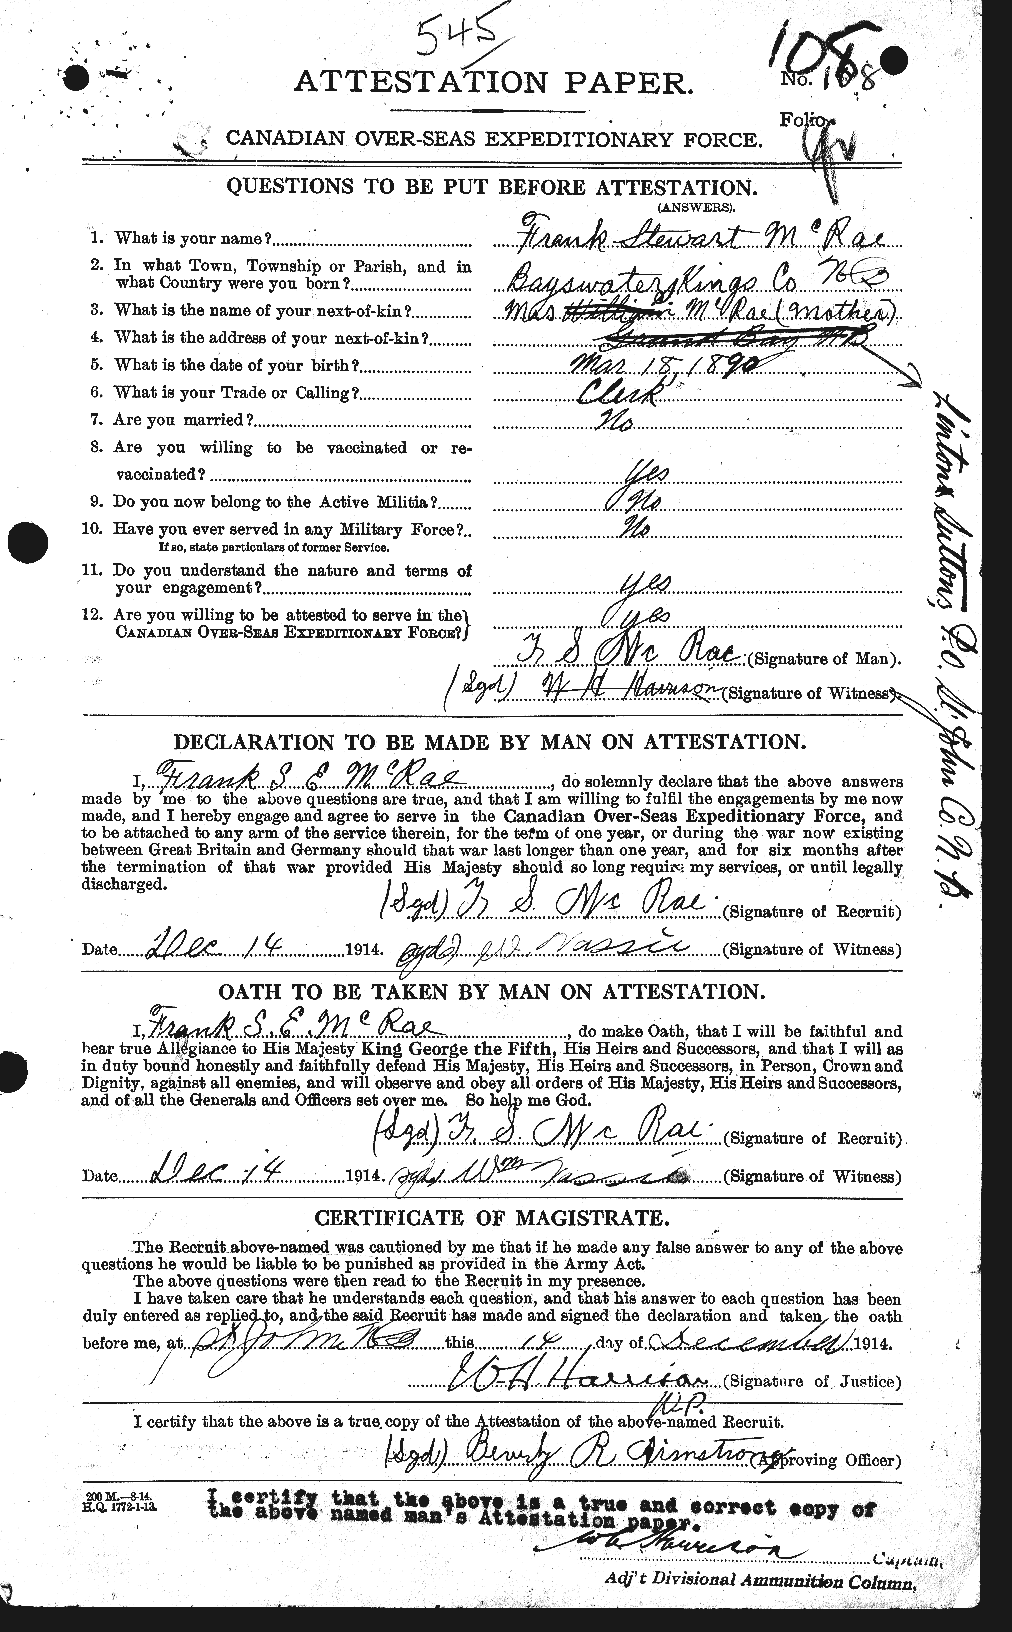 Personnel Records of the First World War - CEF 542720a